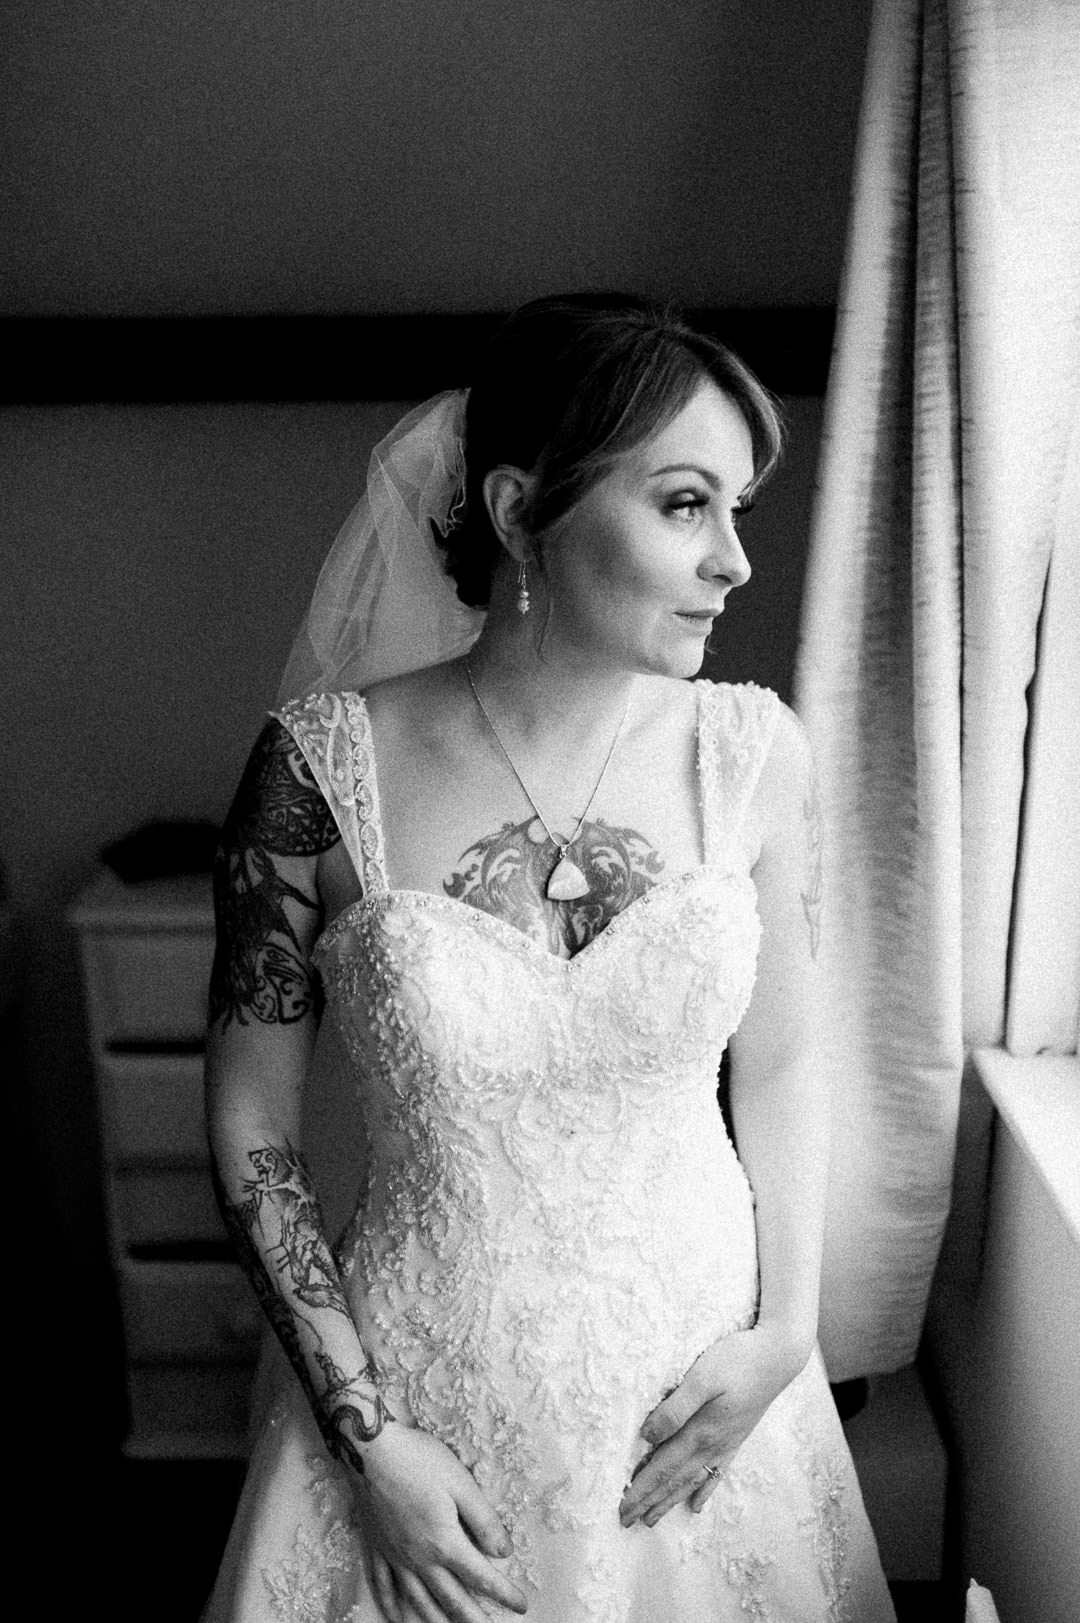 bride with tattoos stood in window light